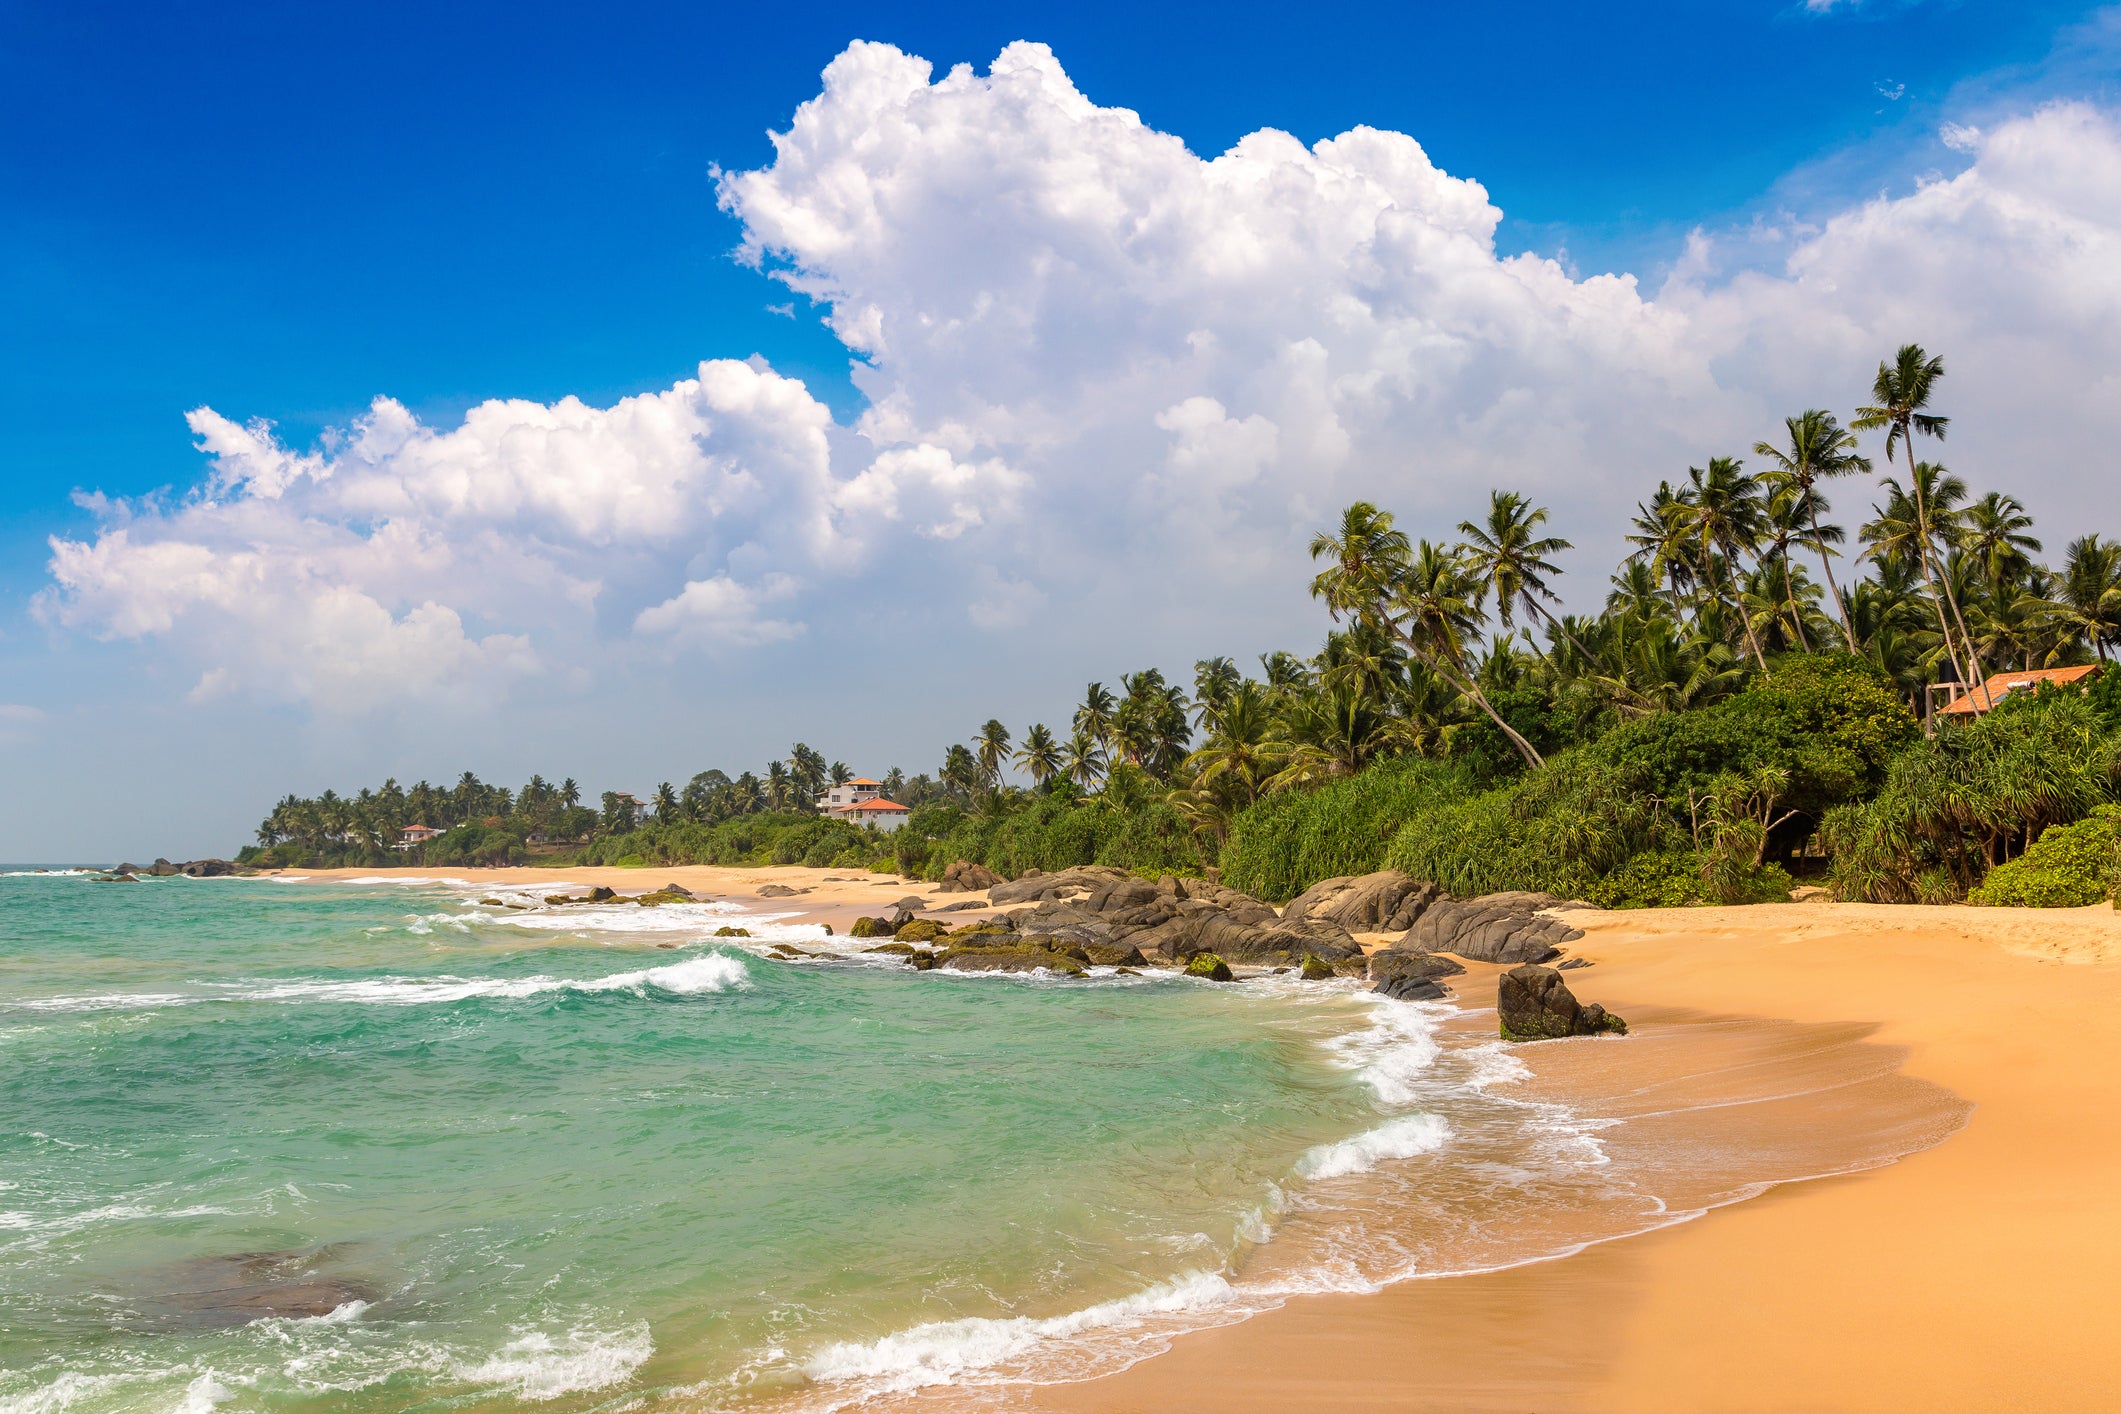 Sri Lanka travel guide: Everything to know before you go